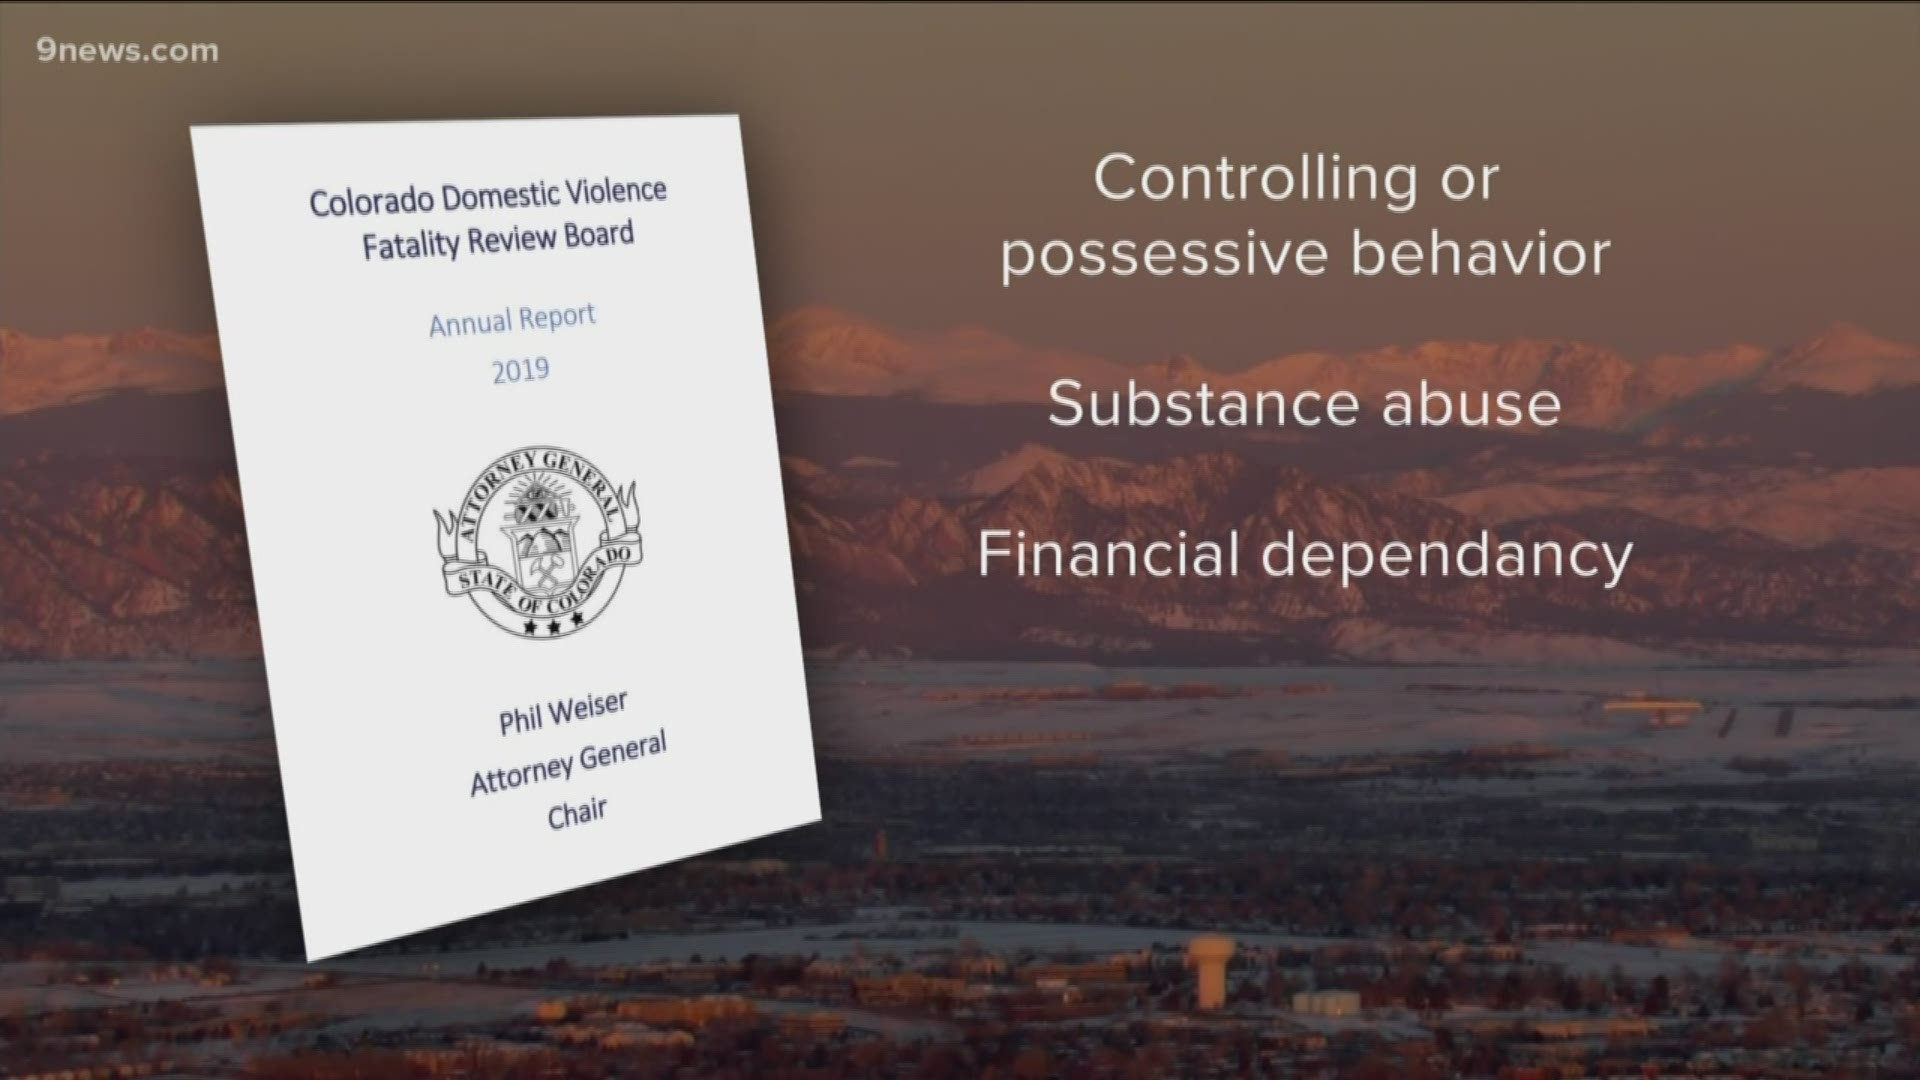 According to the report, Denver had the highest number of domestic violence-related incidents, followed by Adams and Jefferson counties.